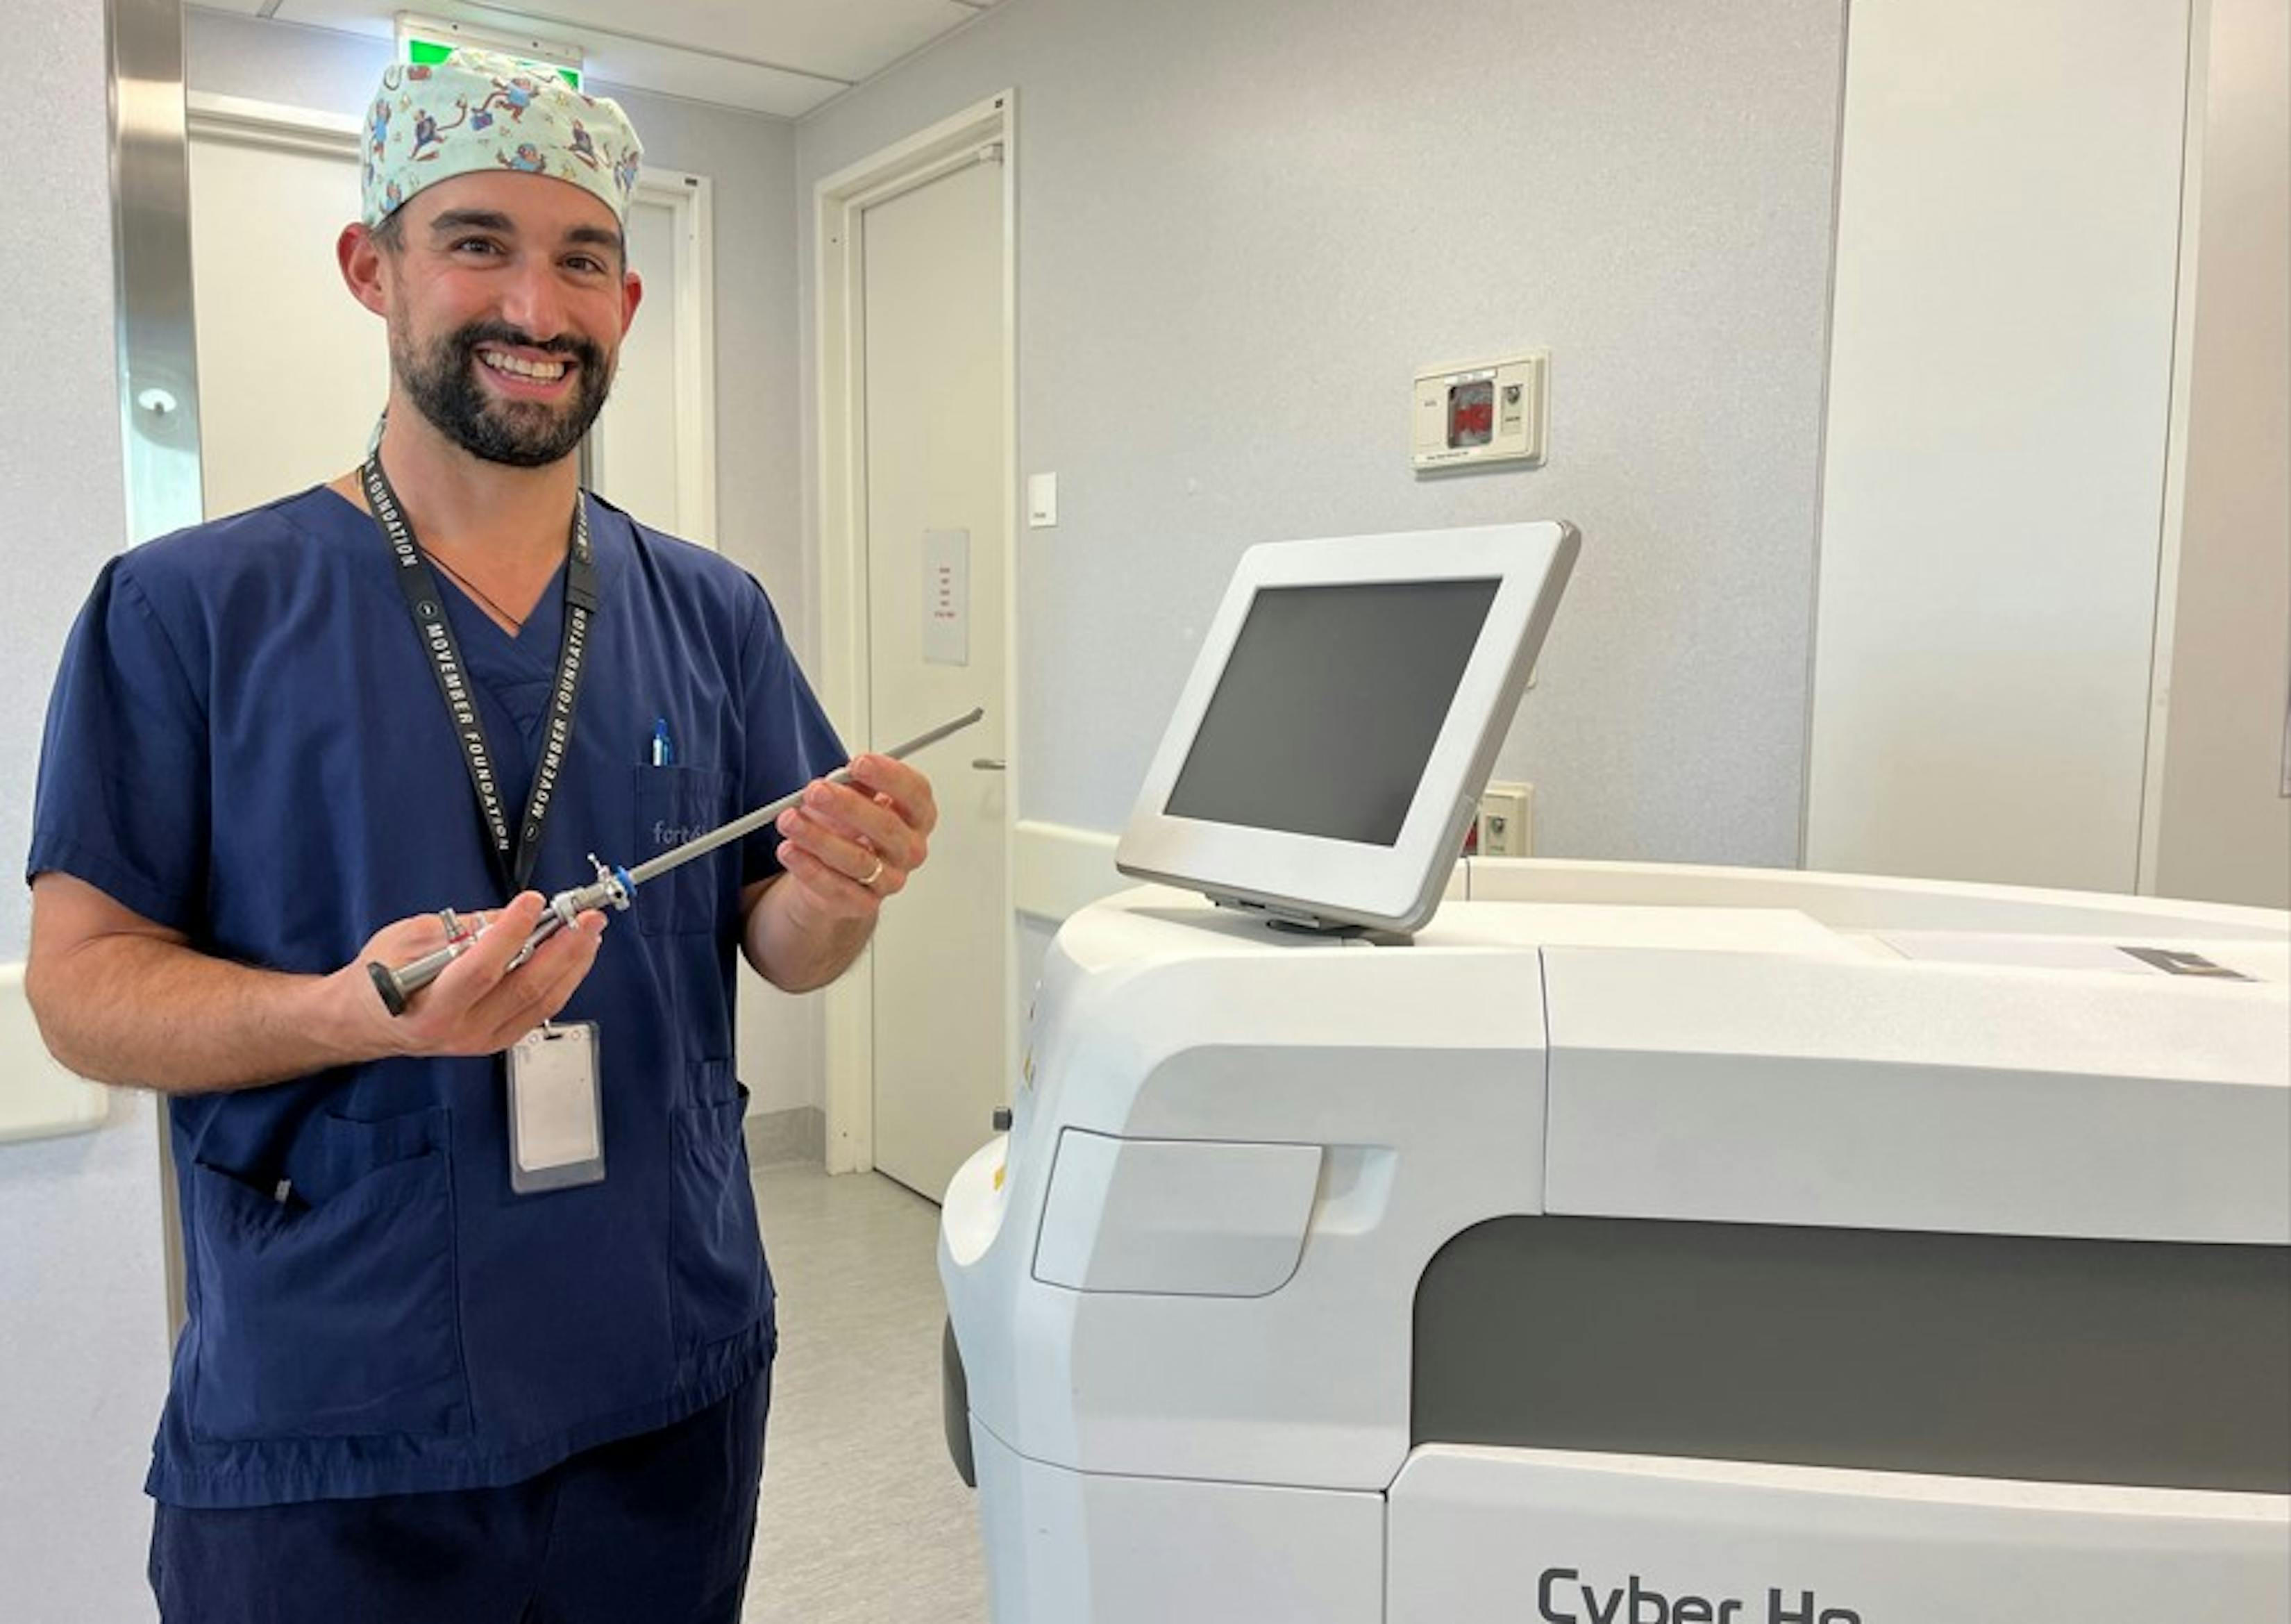 Urological Surgeon Giovanni Losco with the laser machine used for the HoLEP surgery at Forte Health.